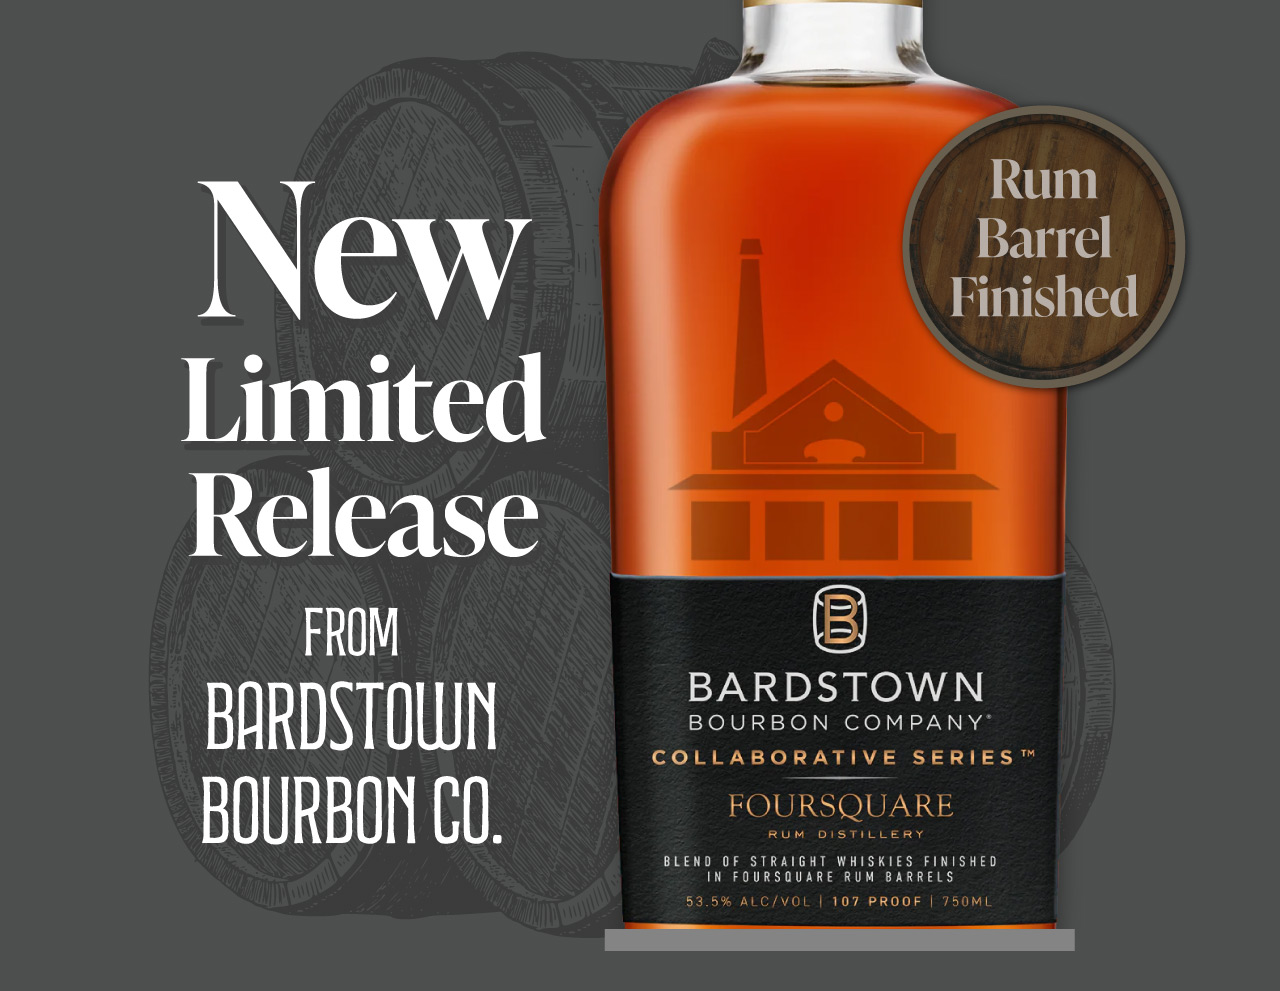 New Limited Release from Bardstown Bourbon Co.